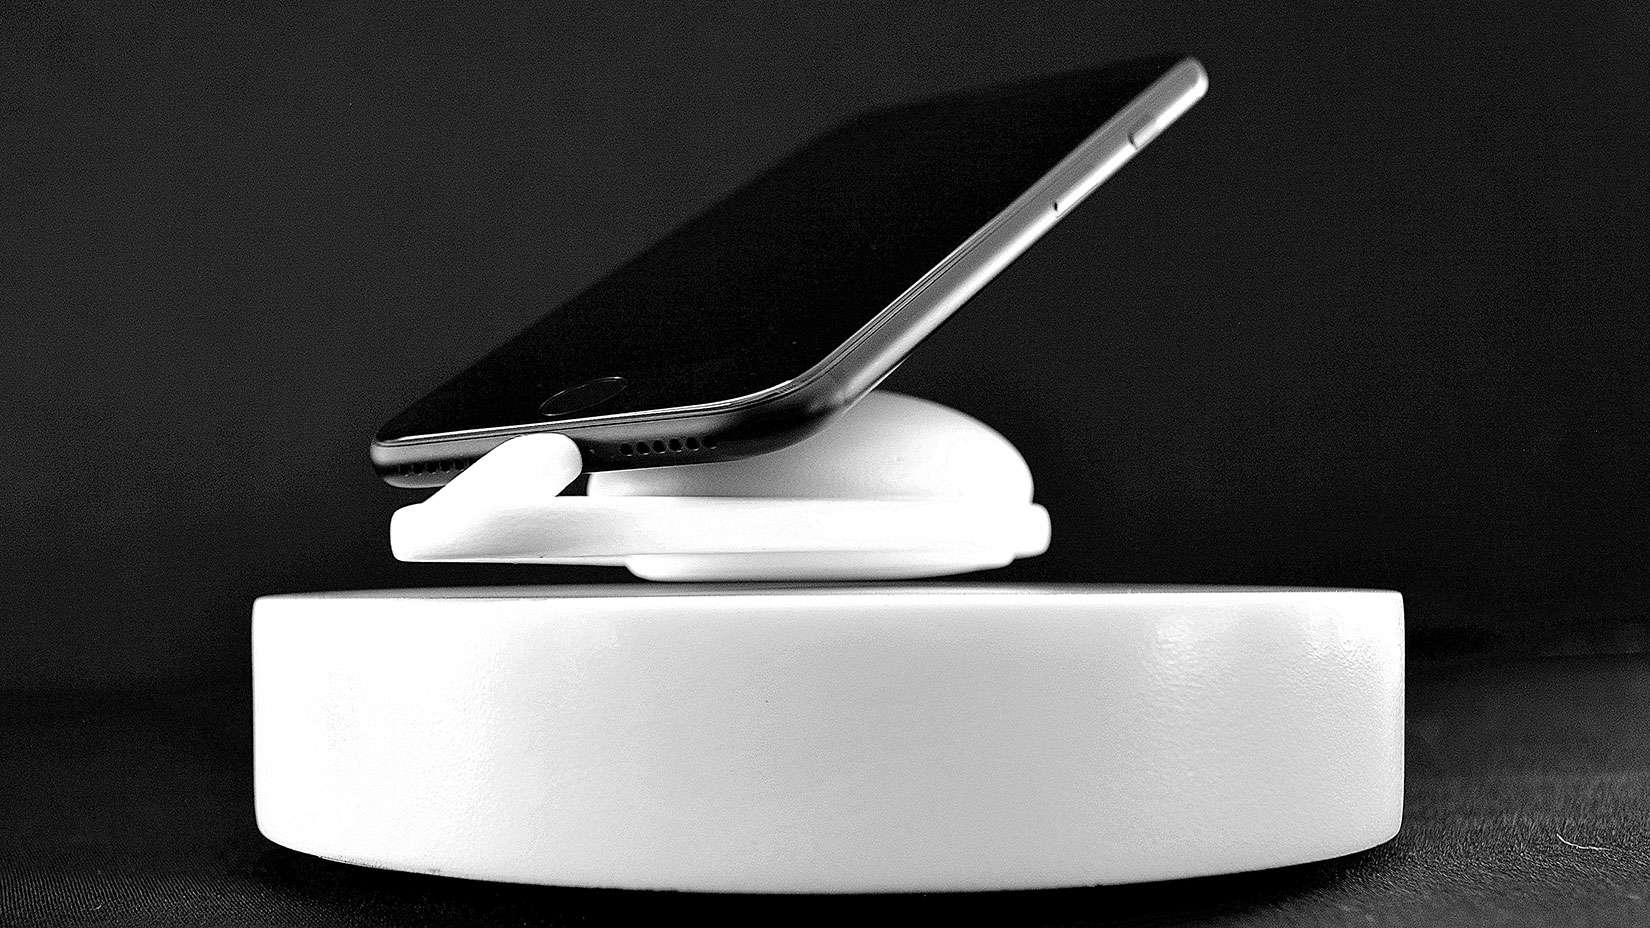 The iPhone can float along magnetic waves as it charges.